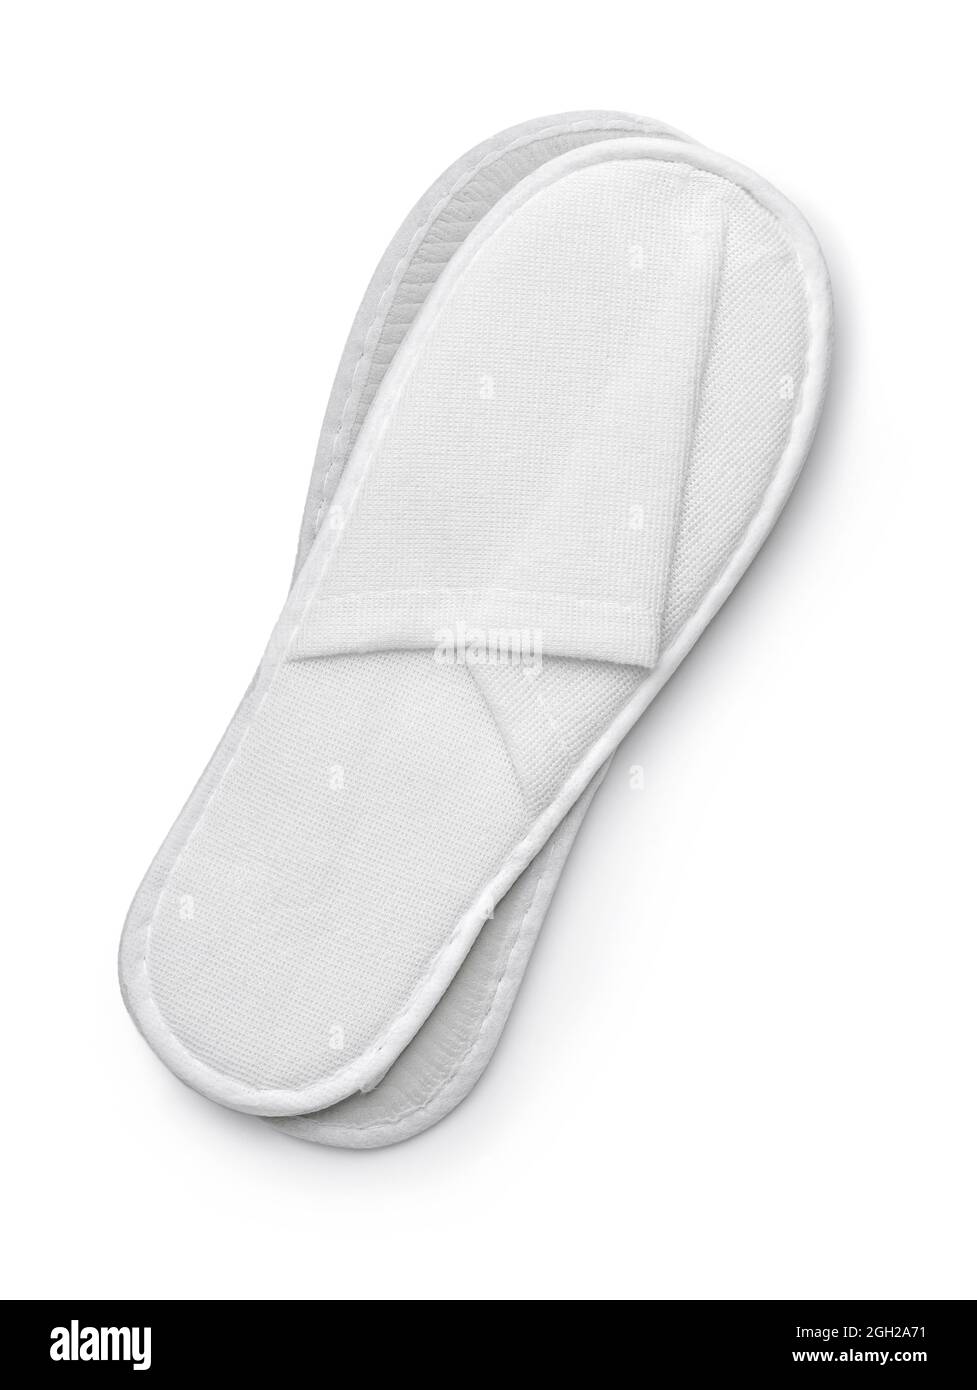 China Five Star Hotel Bathroom Slipper Manufacturers, Suppliers, Factory -  Customized Five Star Hotel Bathroom Slipper Wholesale - LMZ